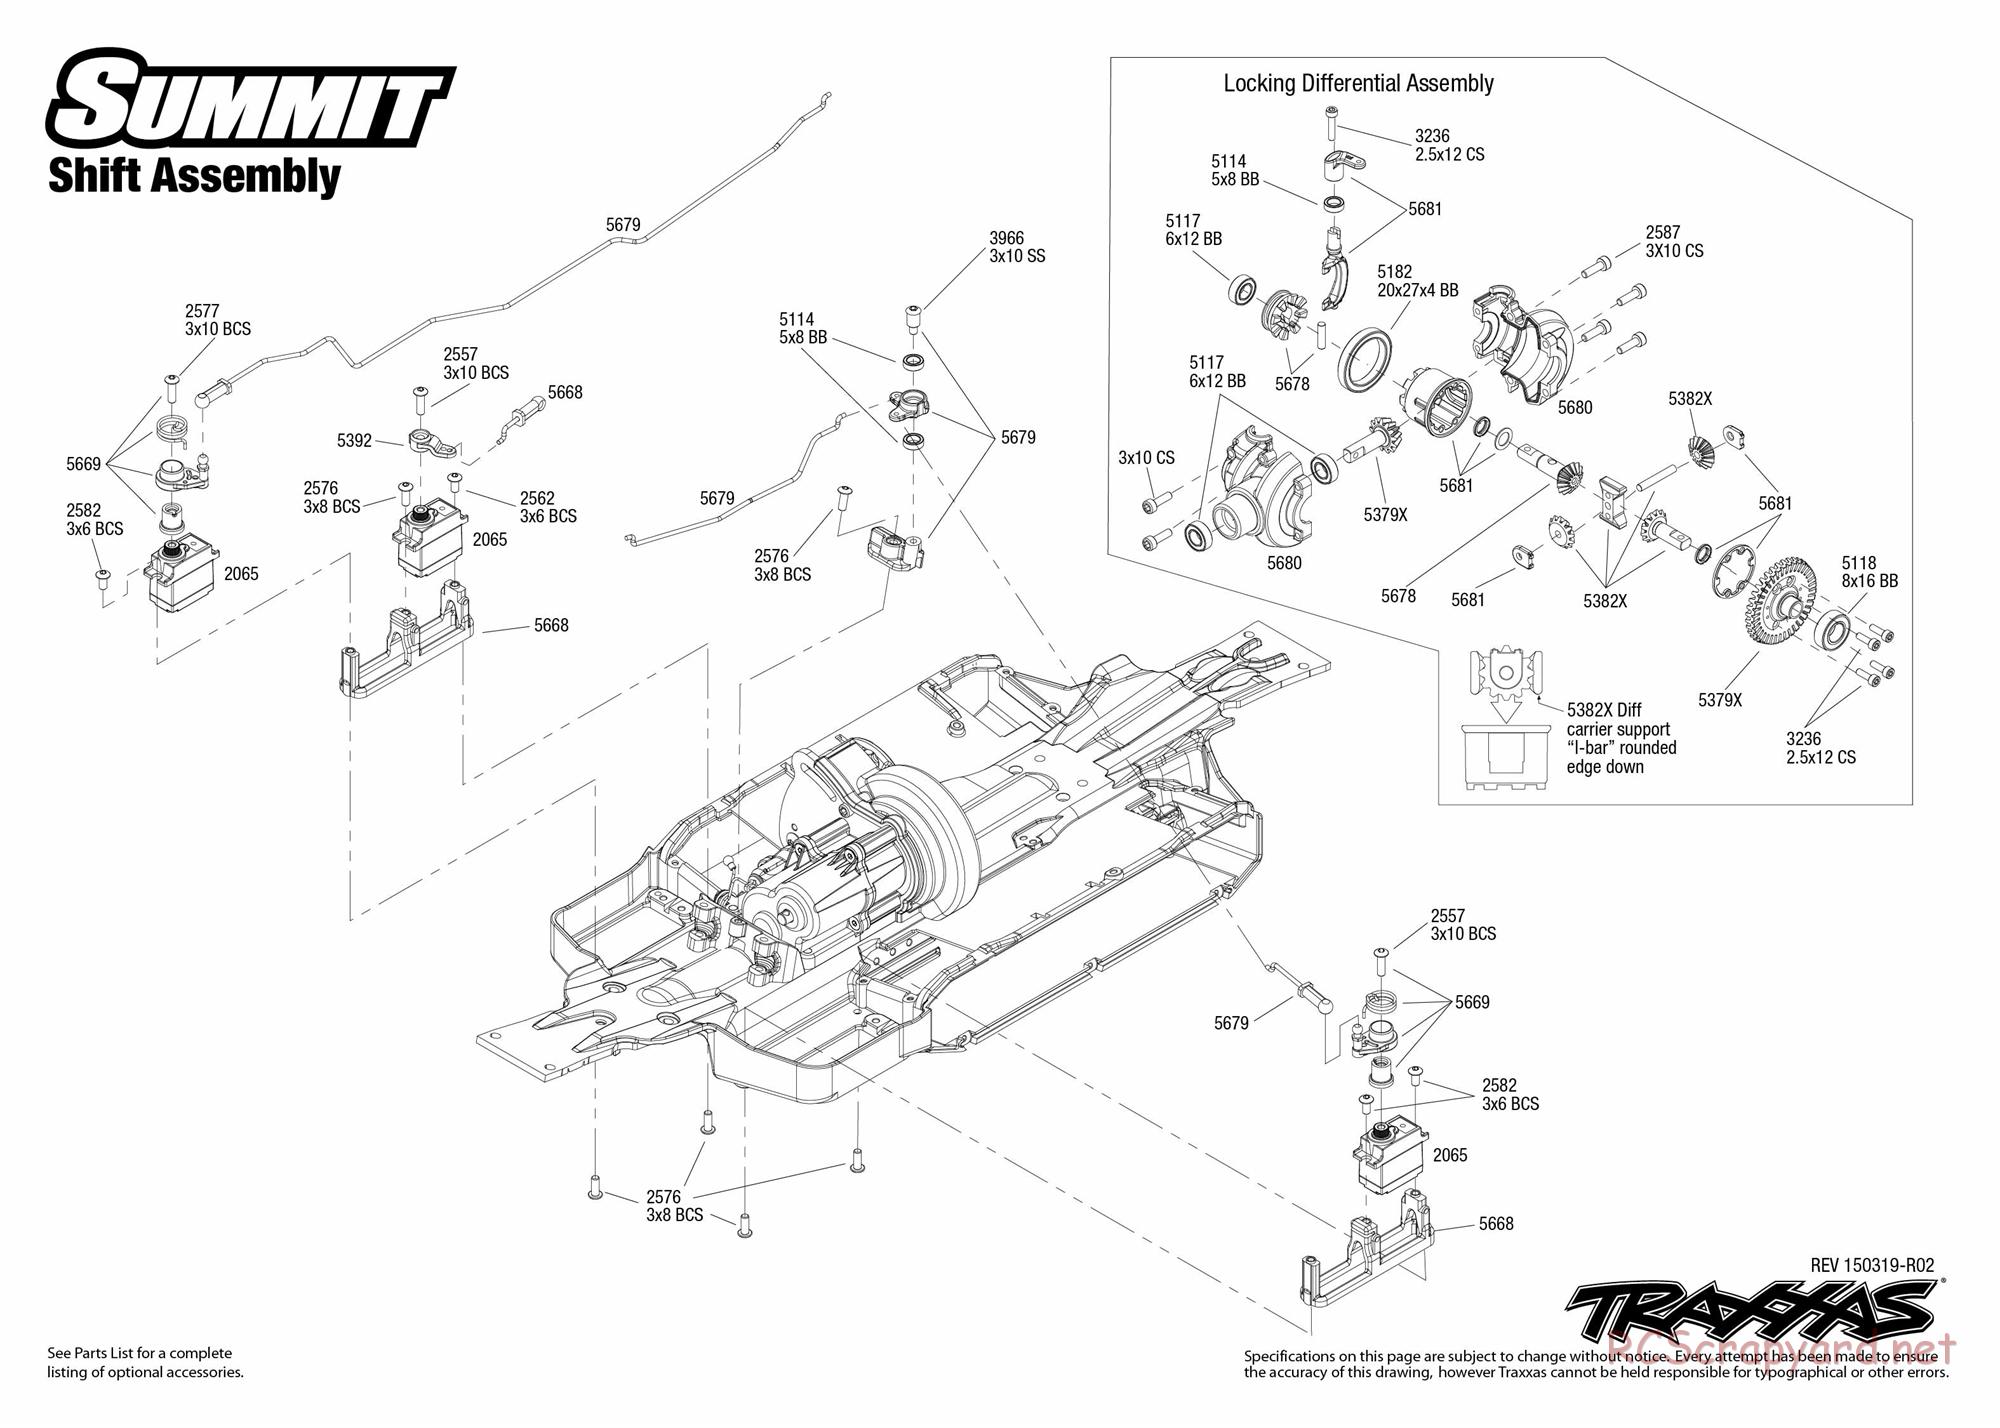 Traxxas - Summit (2014) - Exploded Views - Page 6